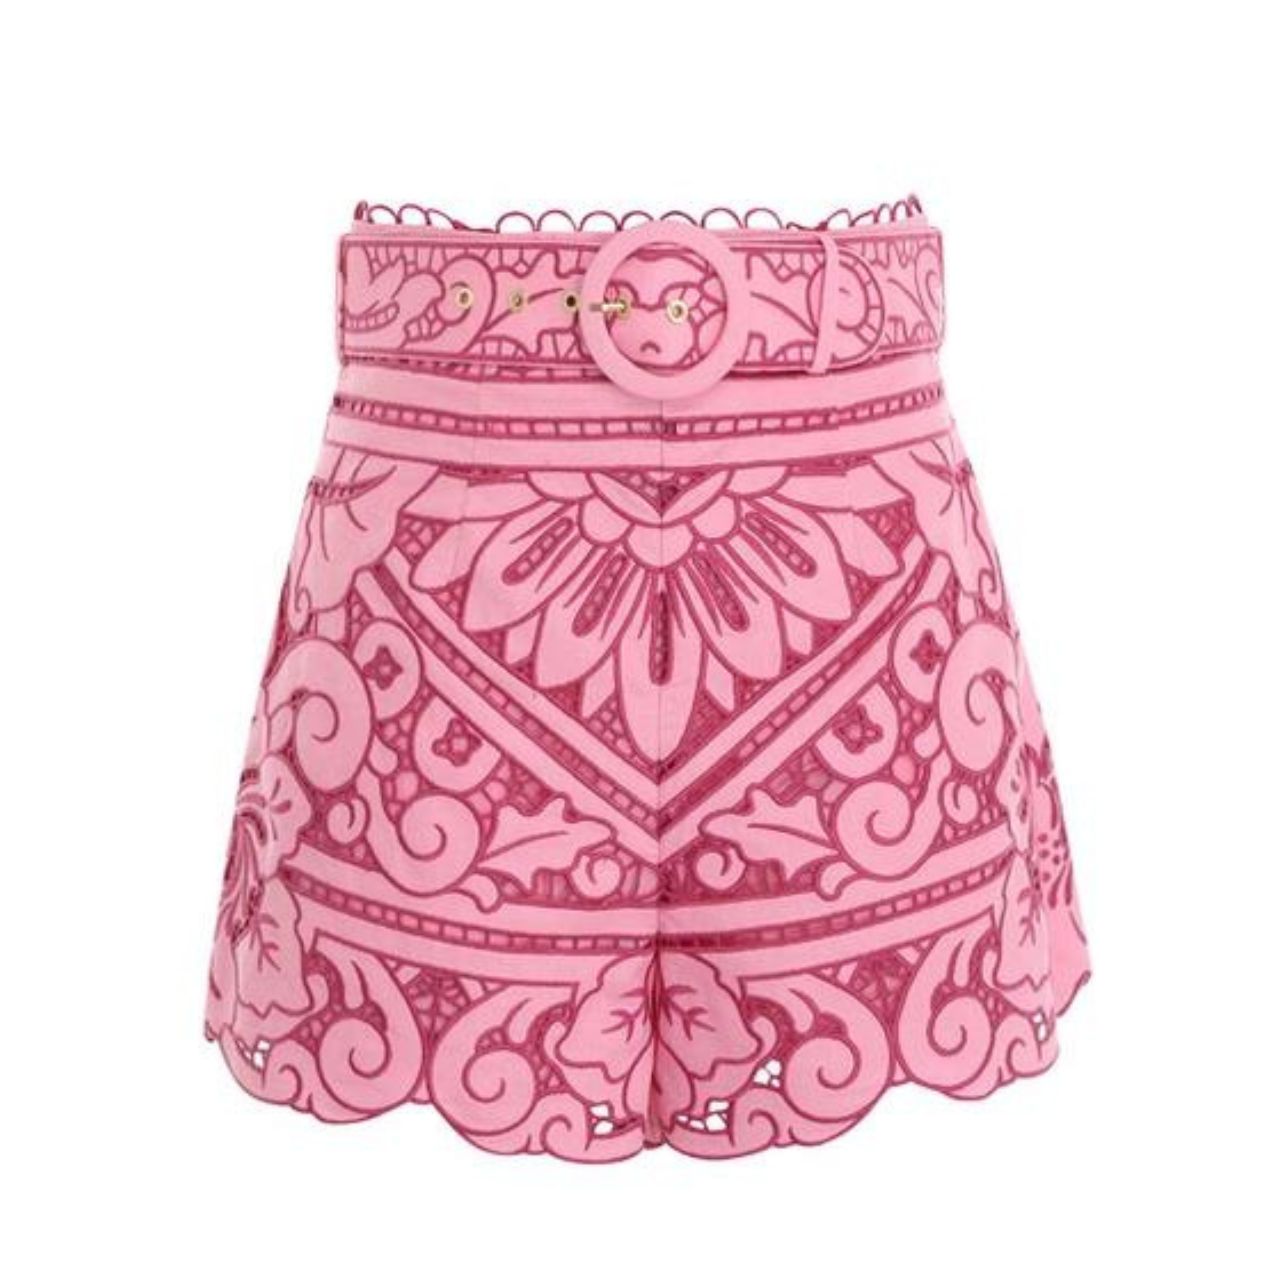 Jude embroidered shorts.